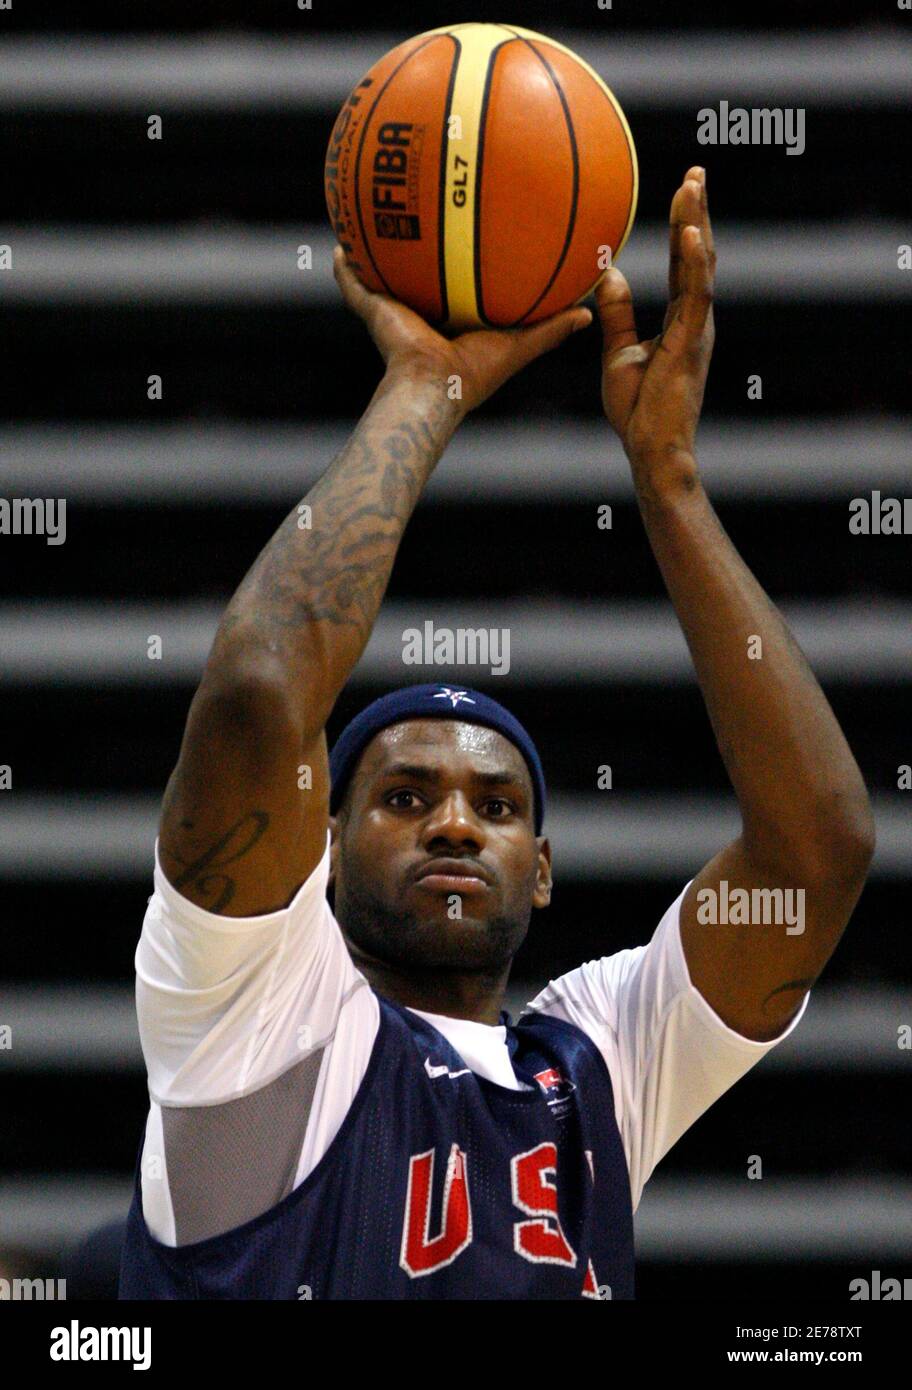 Lebron James Makes A Shot During Usa Men S Basketball Team Training For The Beijing Olympics In Las Vegas Nevada June 28 08 Reuters Lucy Nicholson United States Beijing Olympics 08 Preview Stock Photo Alamy